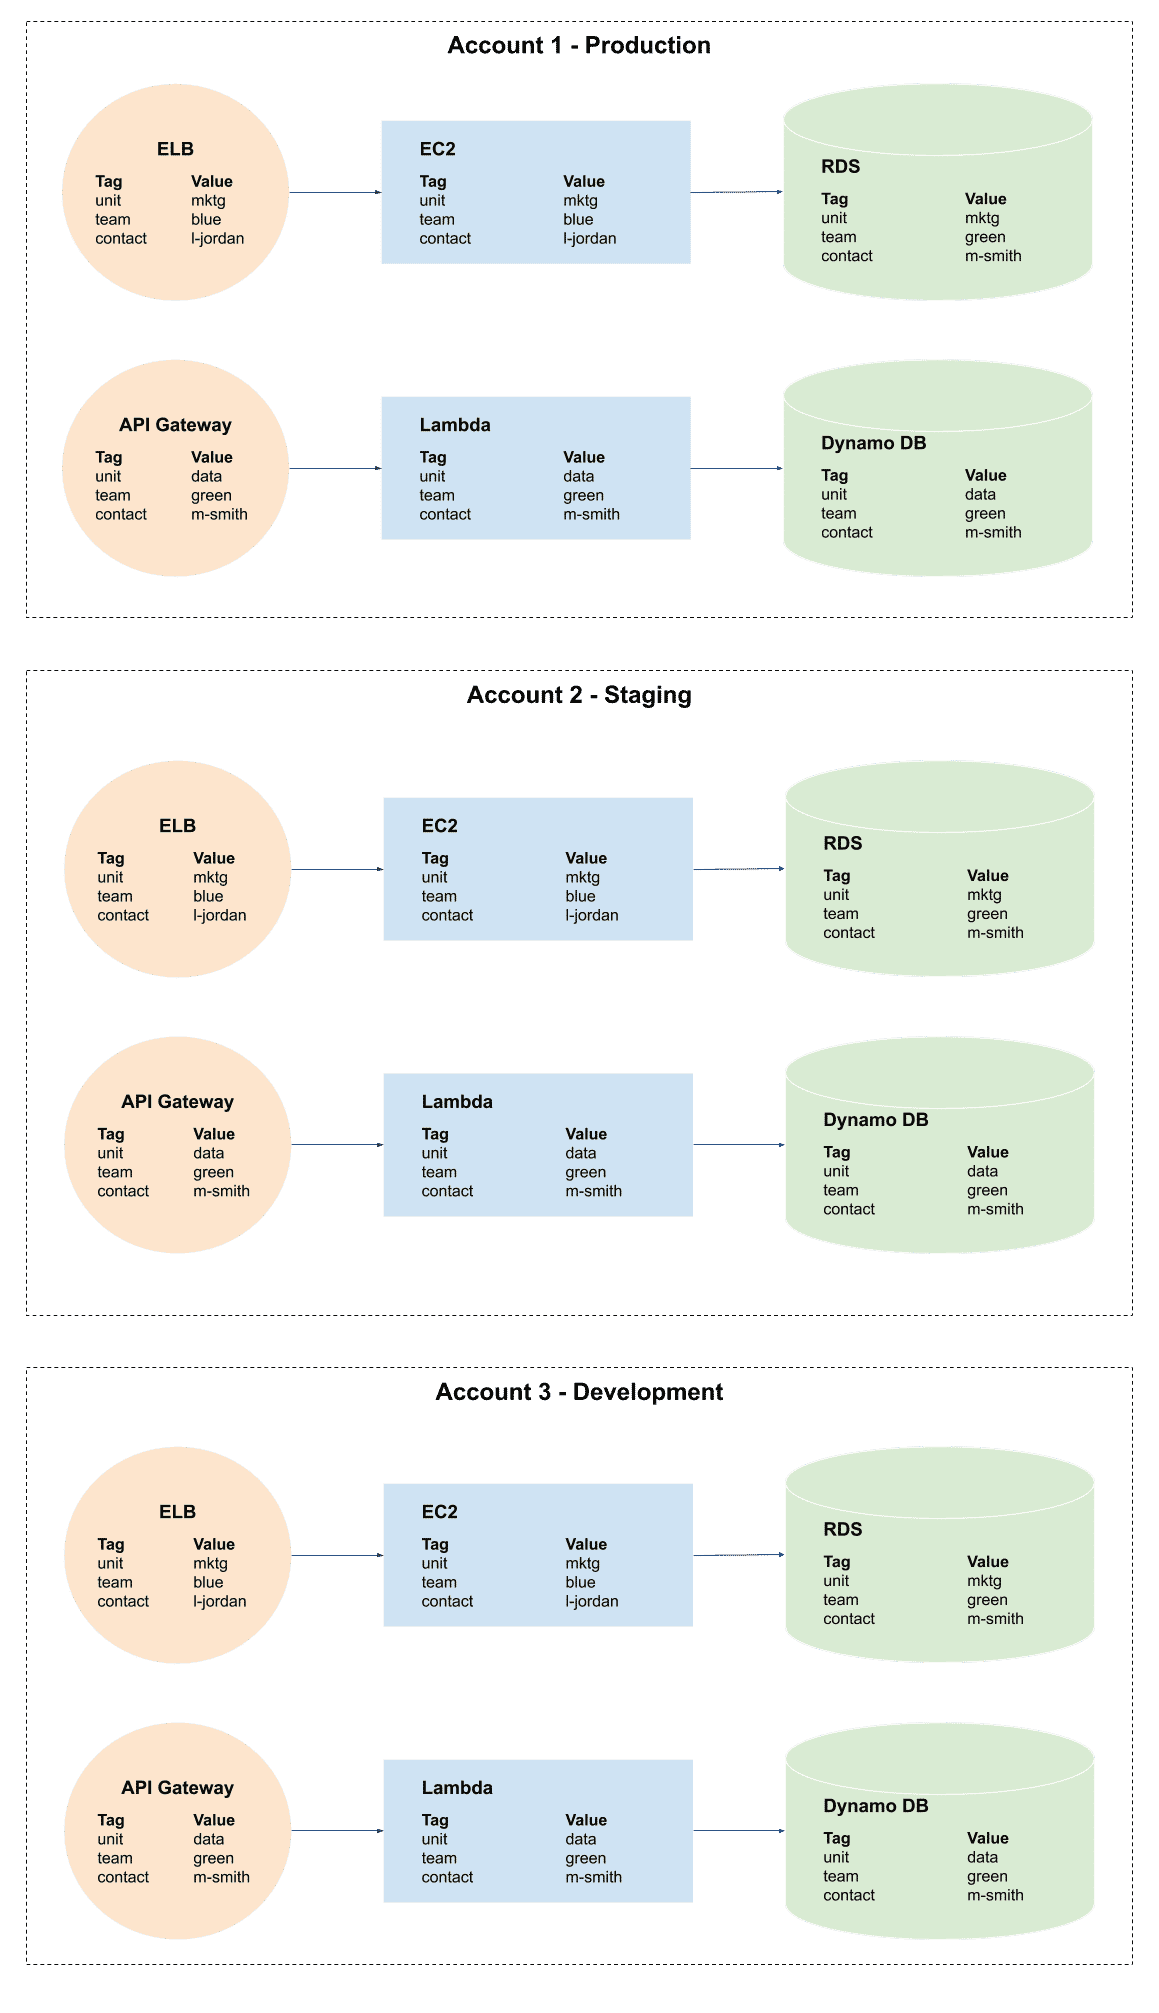 An account-segmented environment and tagging strategy in AWS